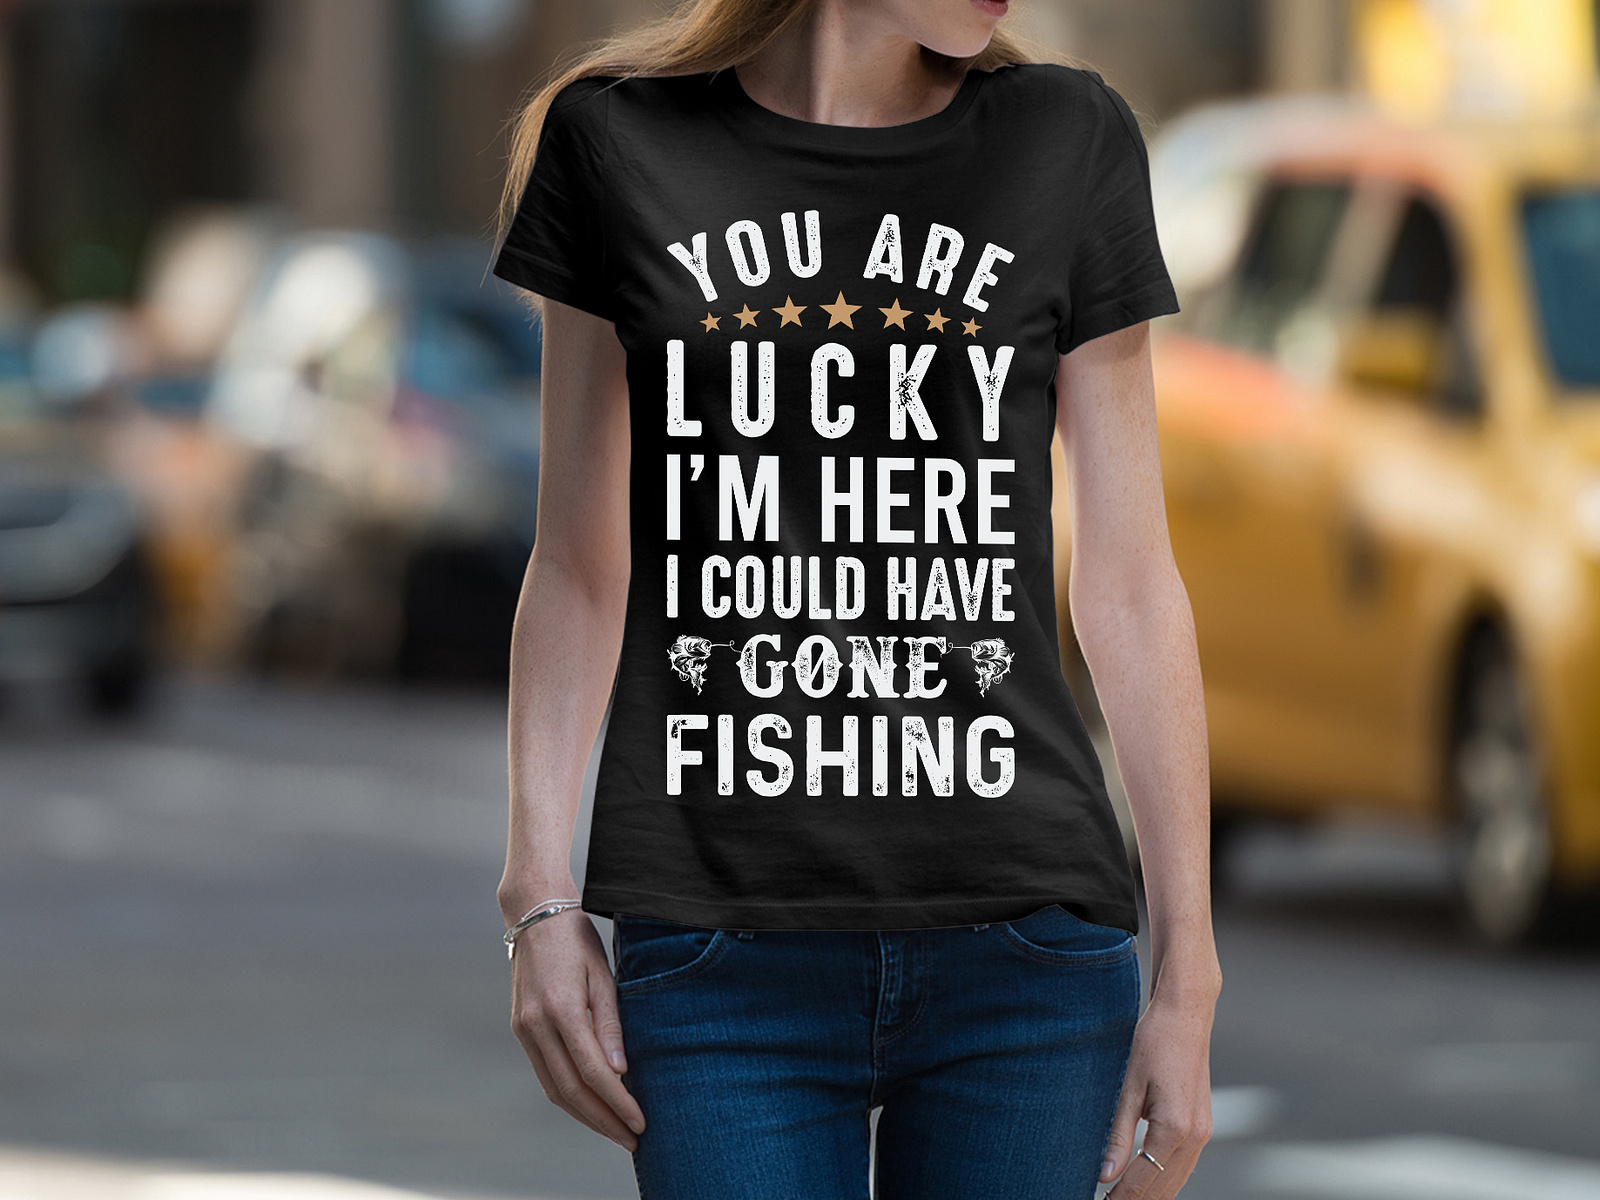 Fishing T-Shirt You're Lucky I'm Here I Could Have Gone Fishing by